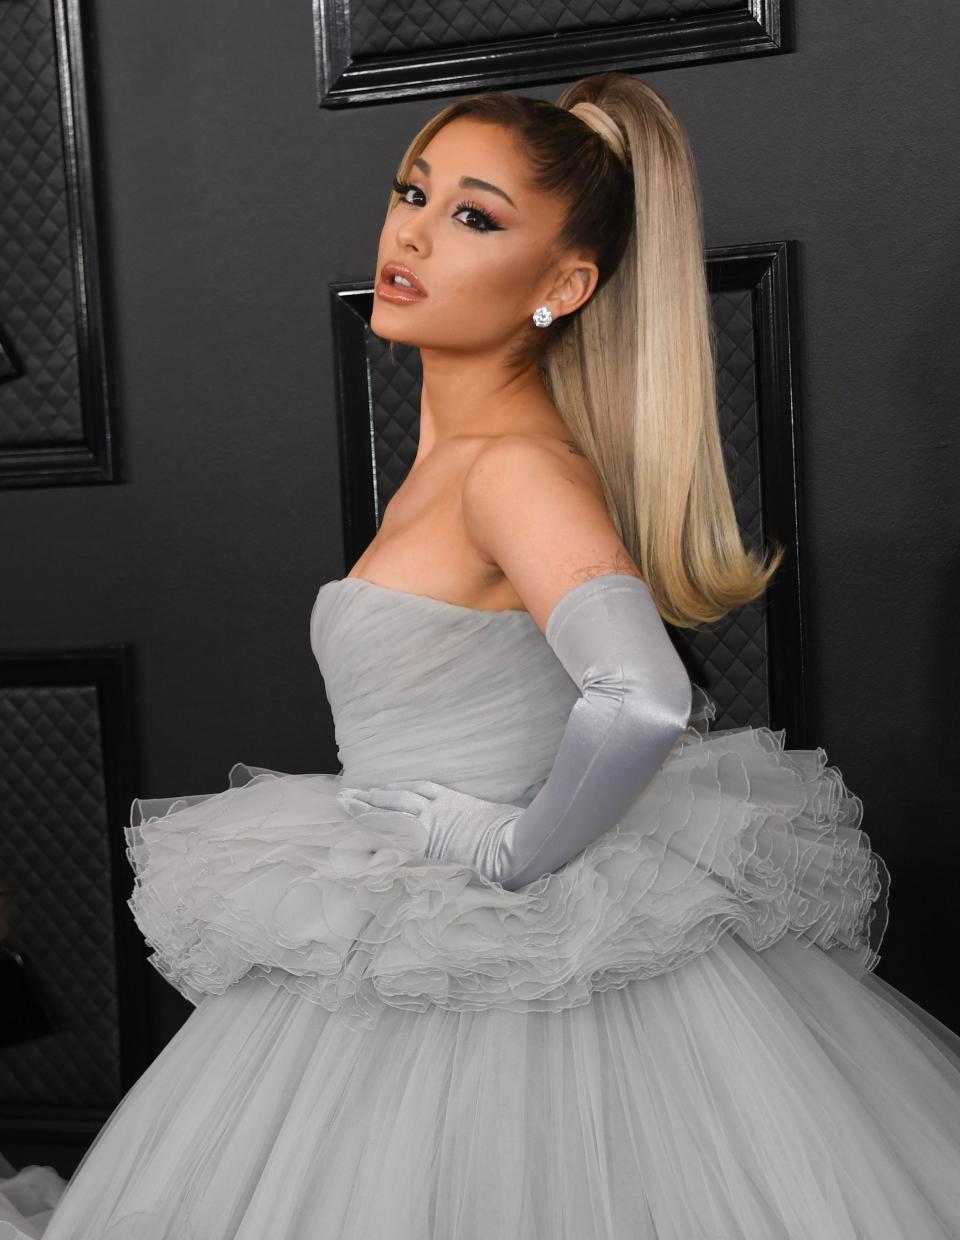 Ariana Grande is showcasing new blonde hair as she is working on the upcoming "Wicked" film alongside Cynthia Erivo.